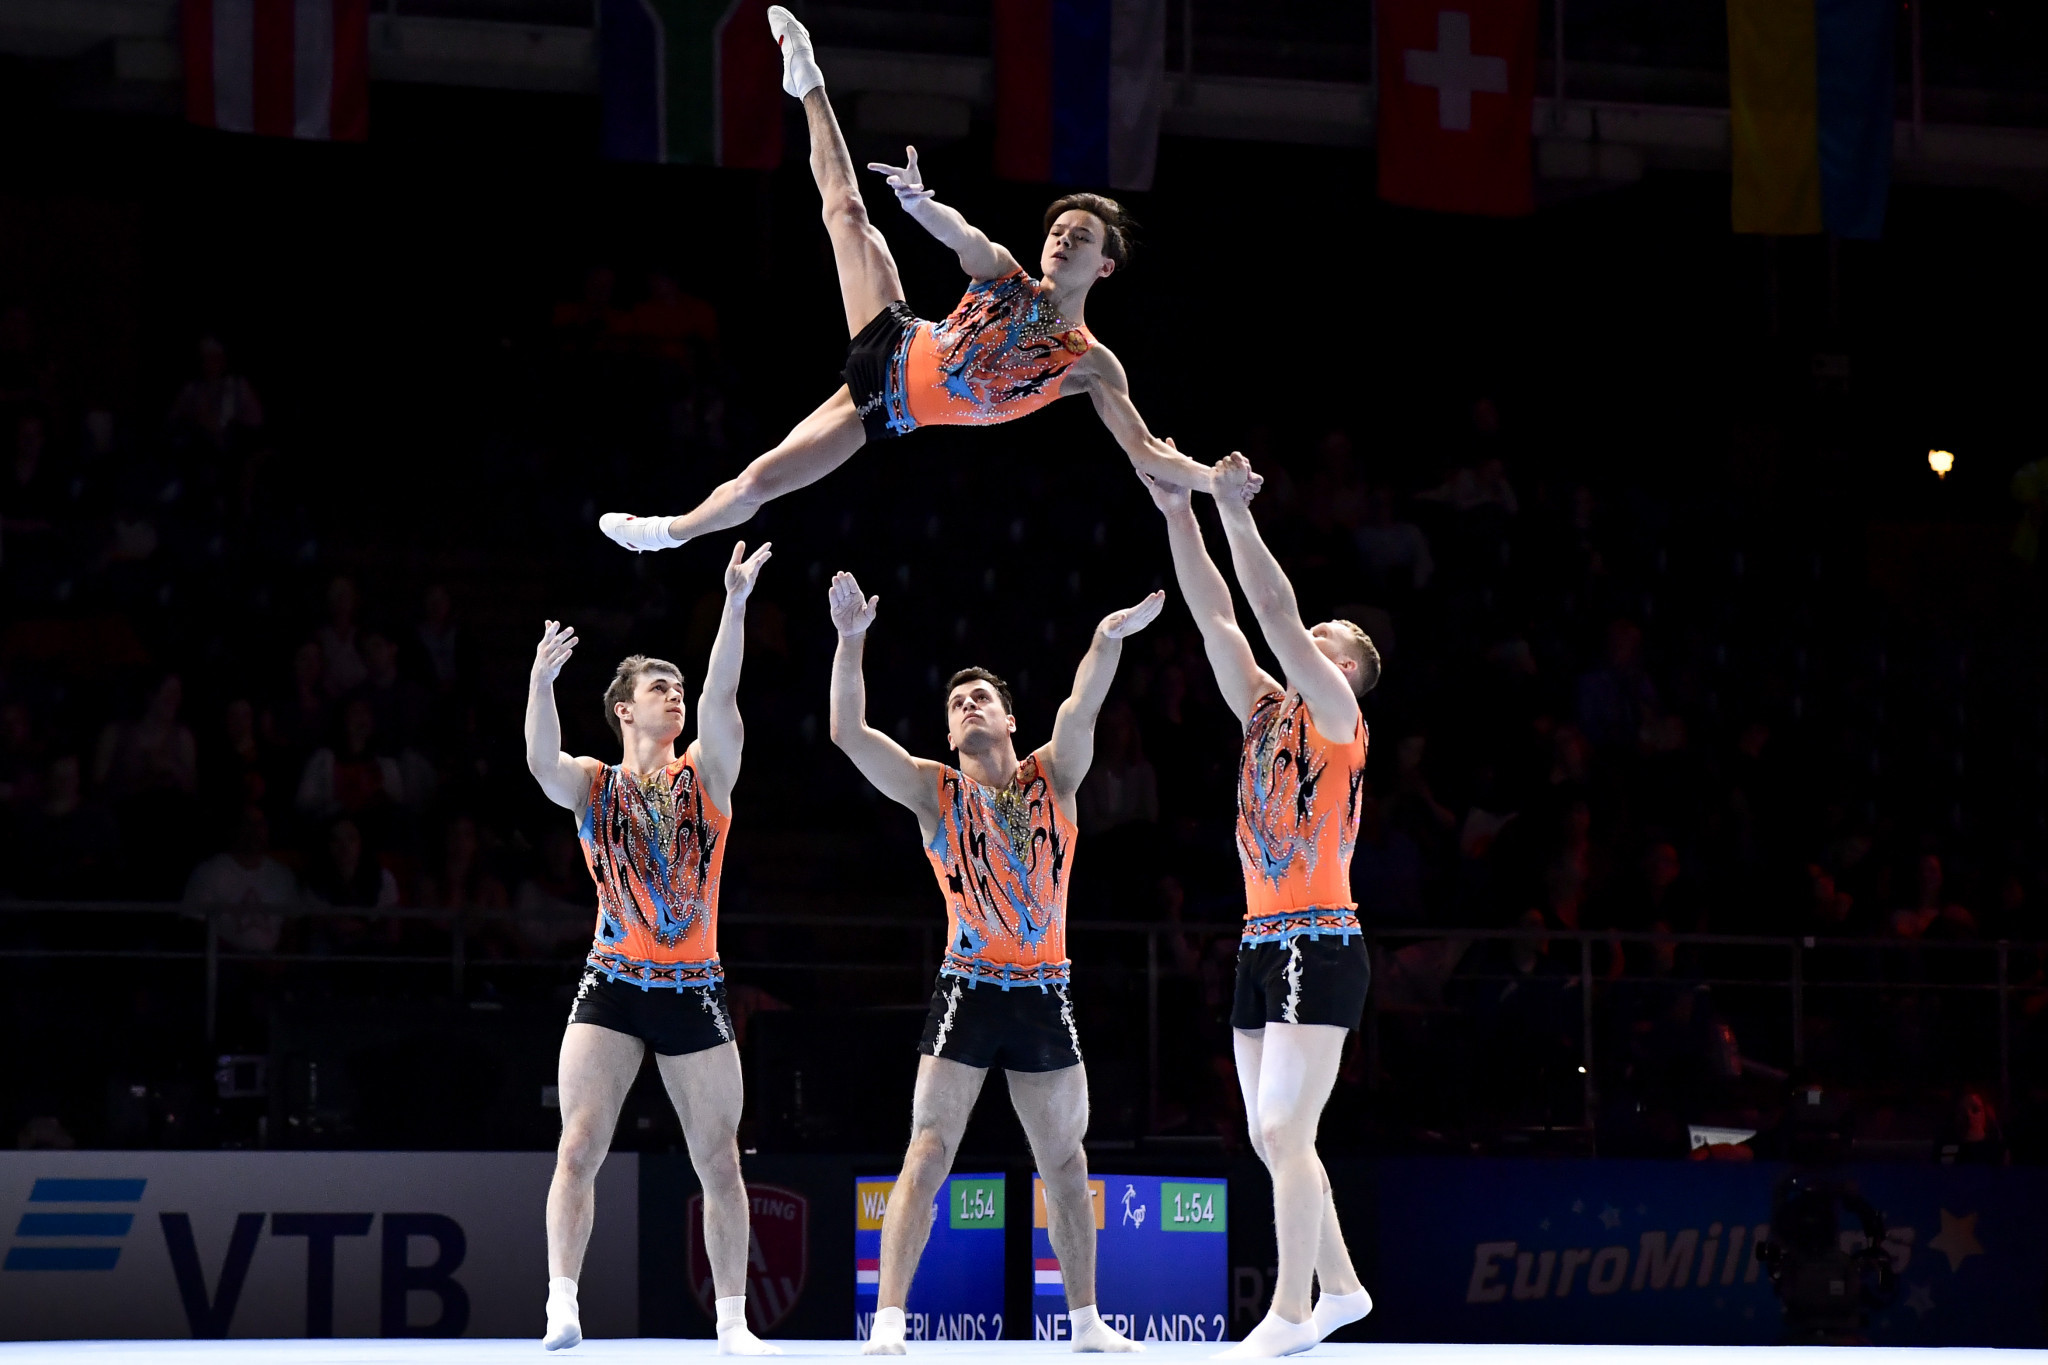 Geneva is due to stage the next edition of the Acrobatic Gymnastics World Championships, which was initially scheduled in 2020 ©Getty Images